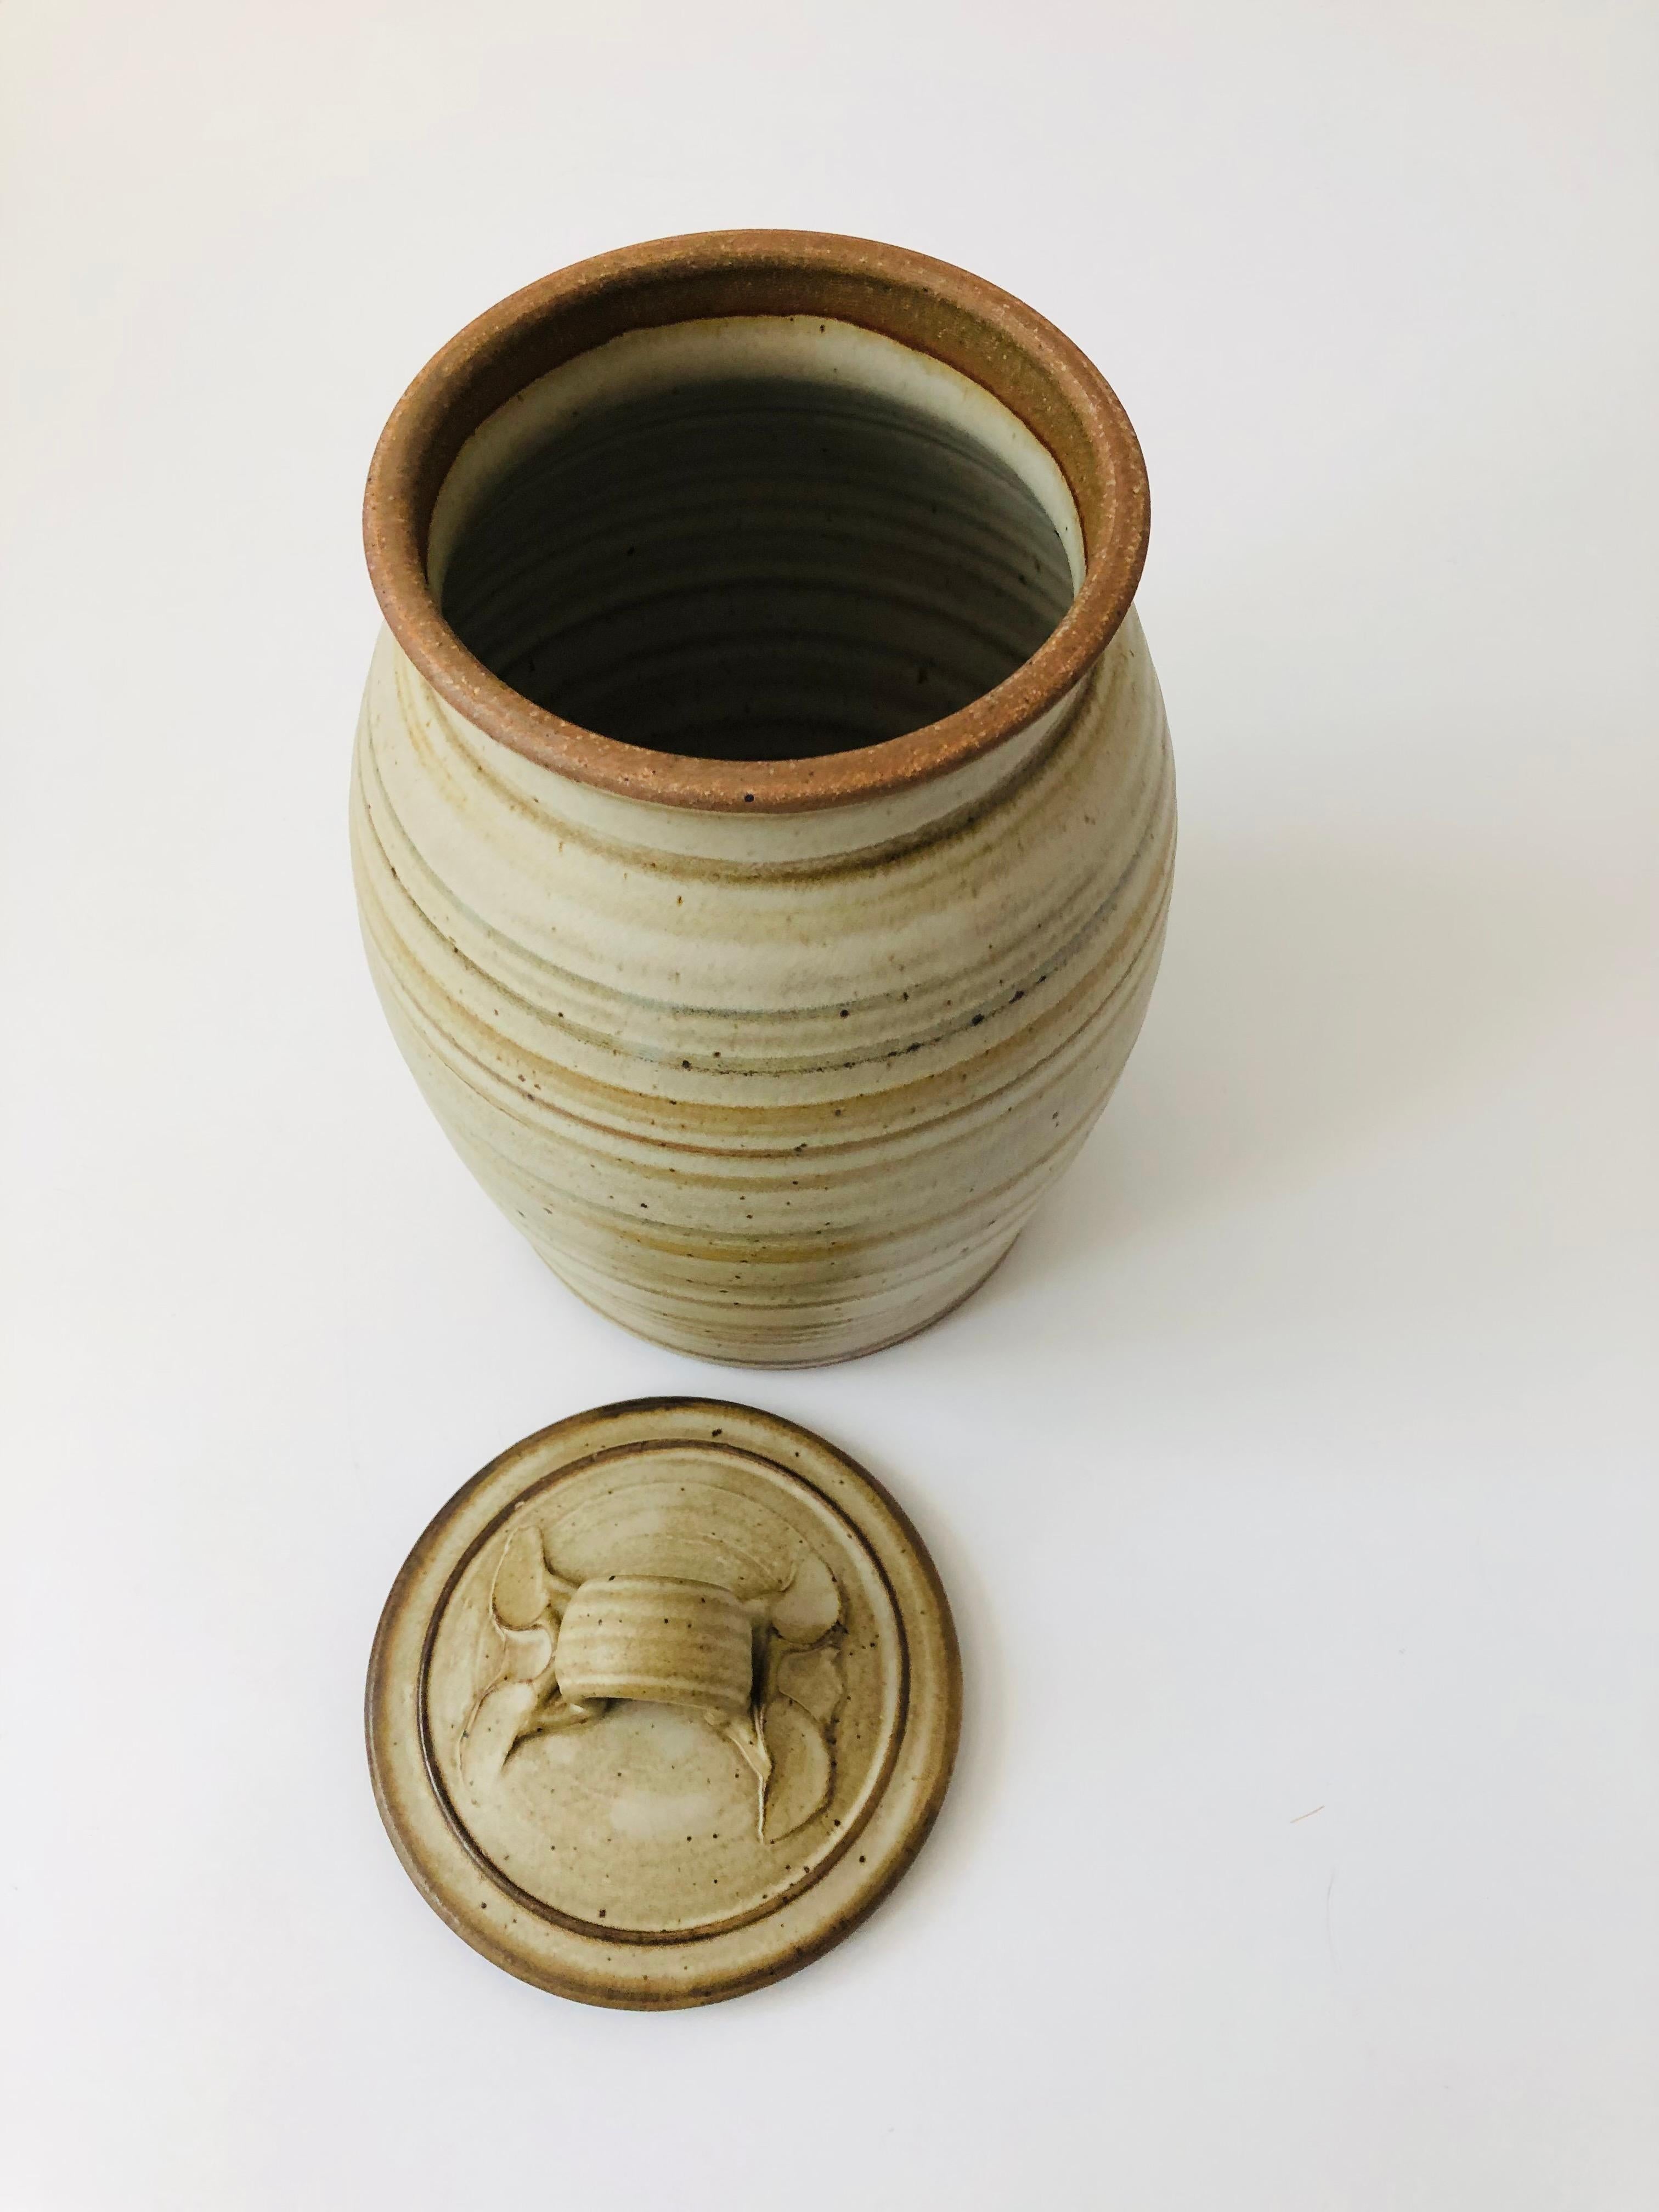 North American Vintage Studio Pottery Canister by Tim Wedel